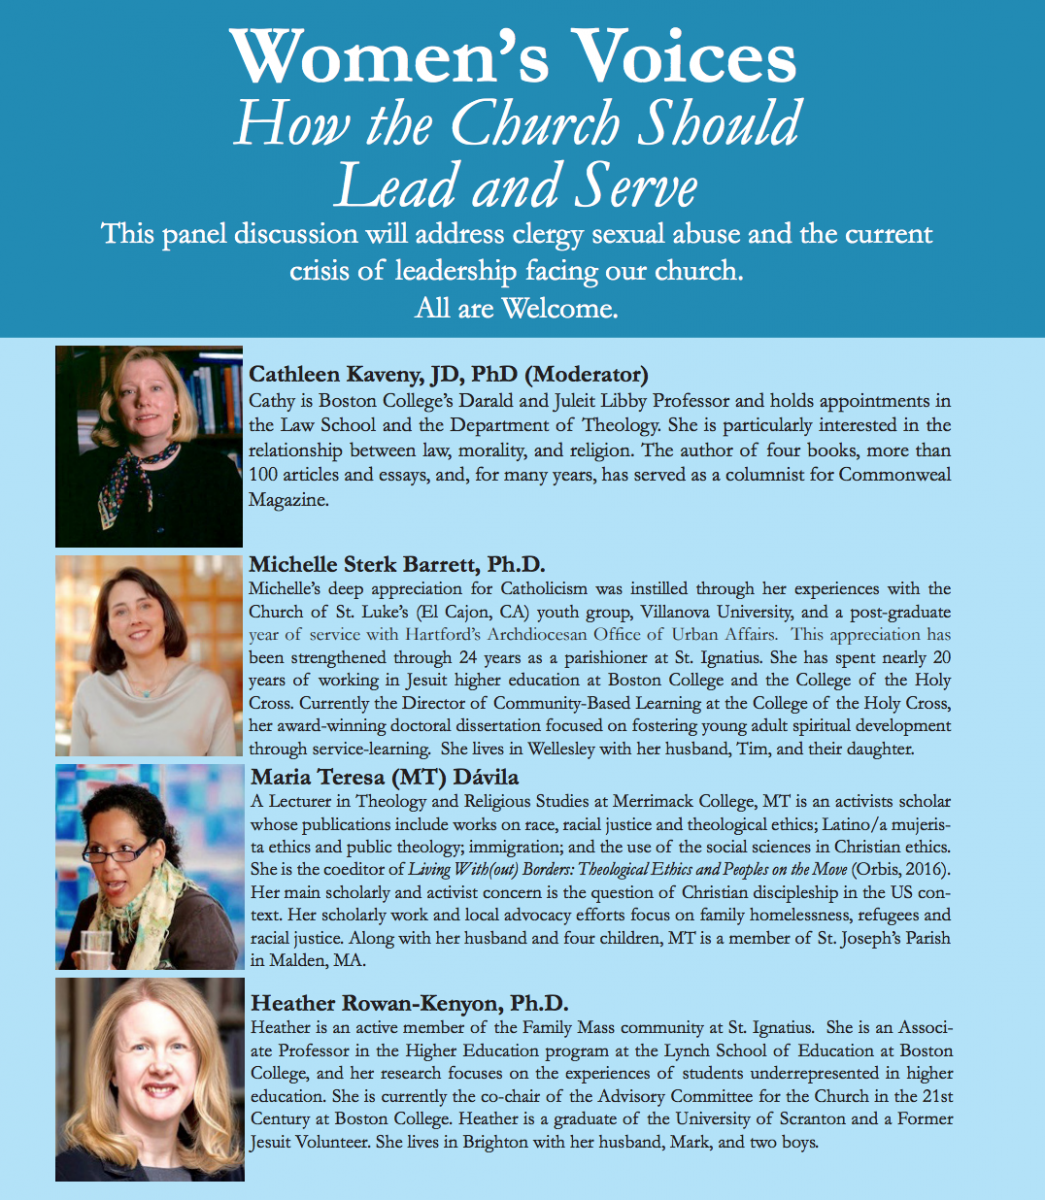 Poster for the event: Women's Voices - How the Church Should Lead and Serve.